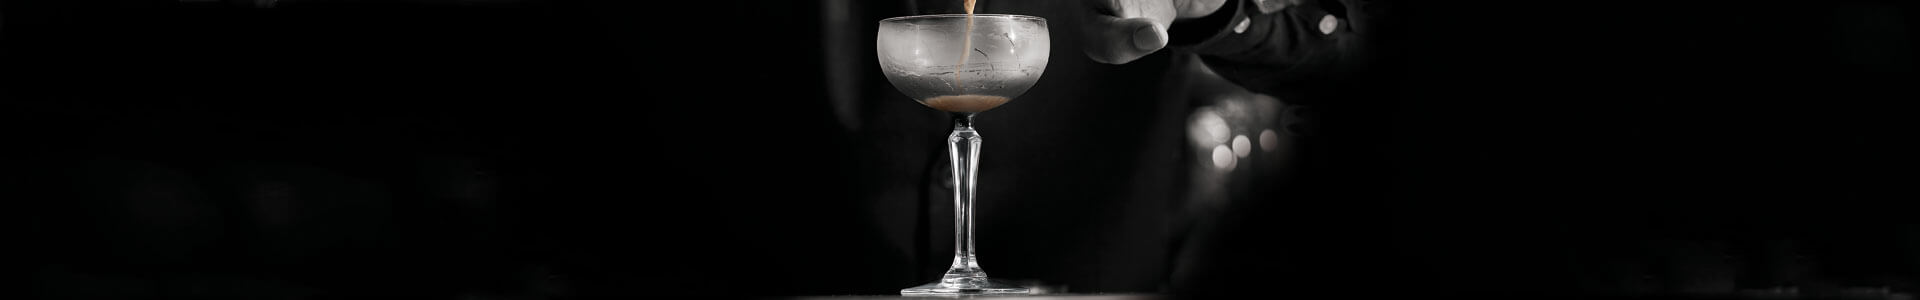 A cocktail glass from Onis is being filled with a cocktail.